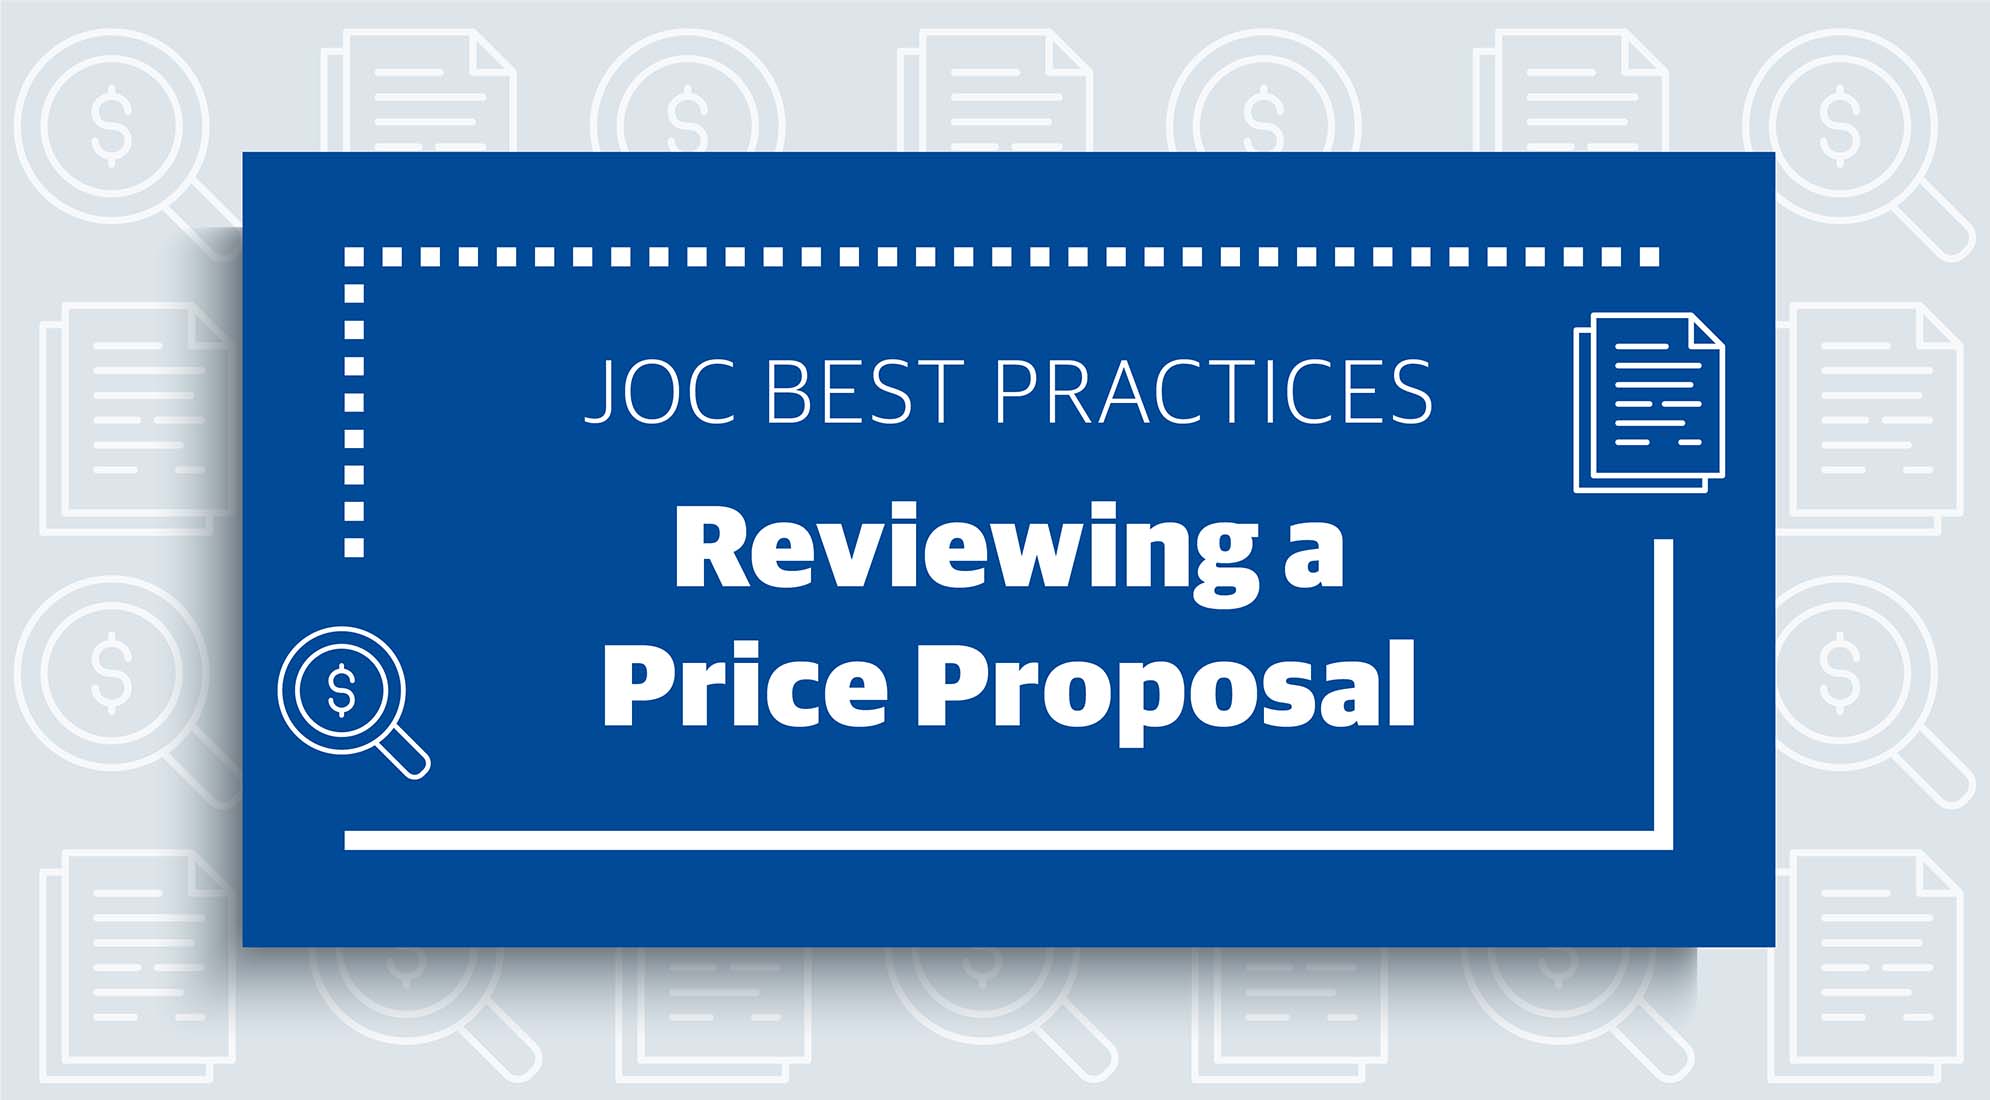 Gordian Account Managers discuss best practice for reviewing a JOC price proposal.